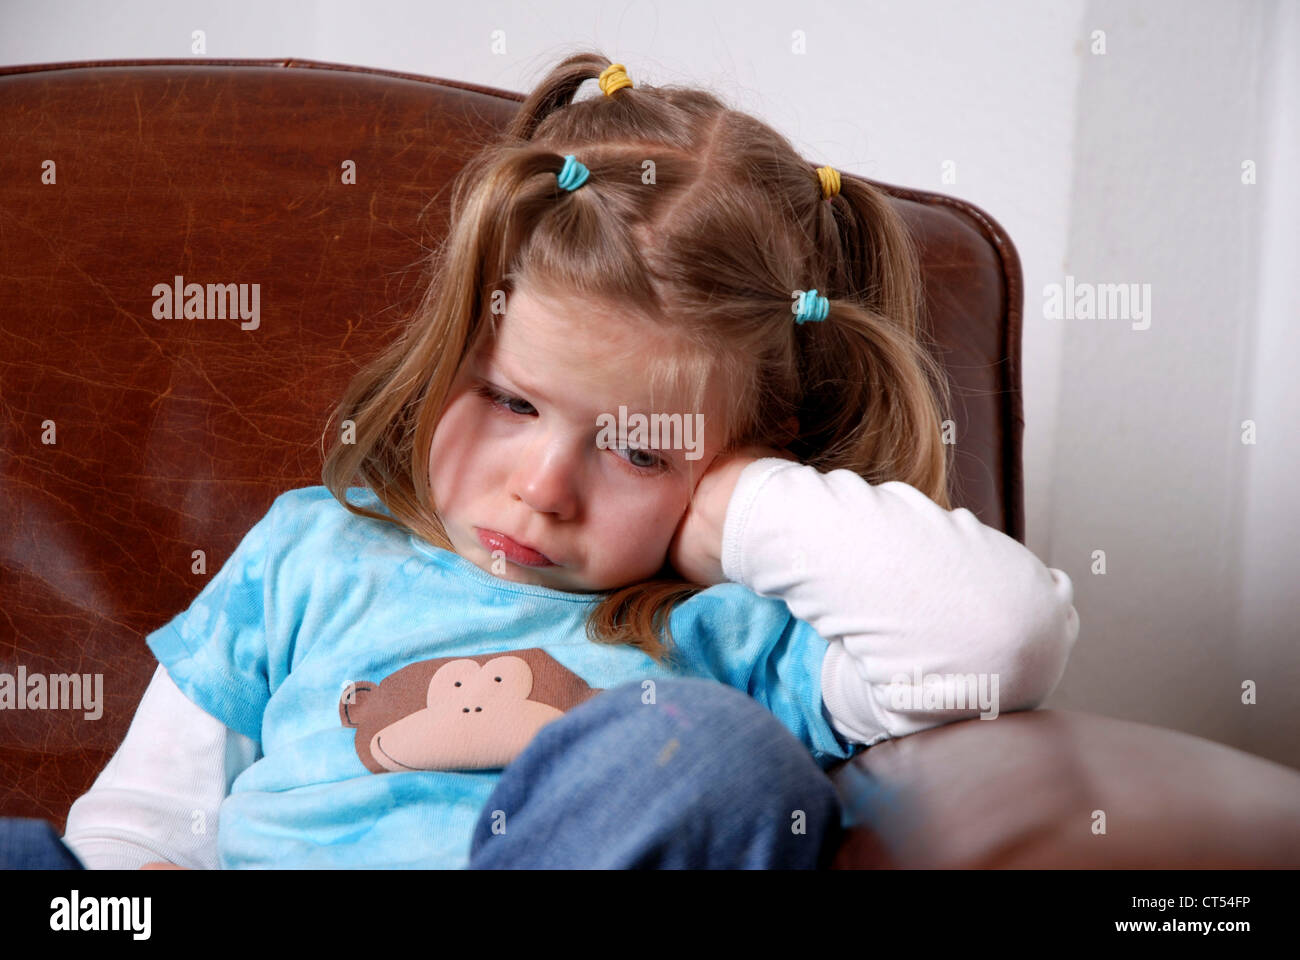 3-5 YEARS OLD CHILD CRYING Stock Photo